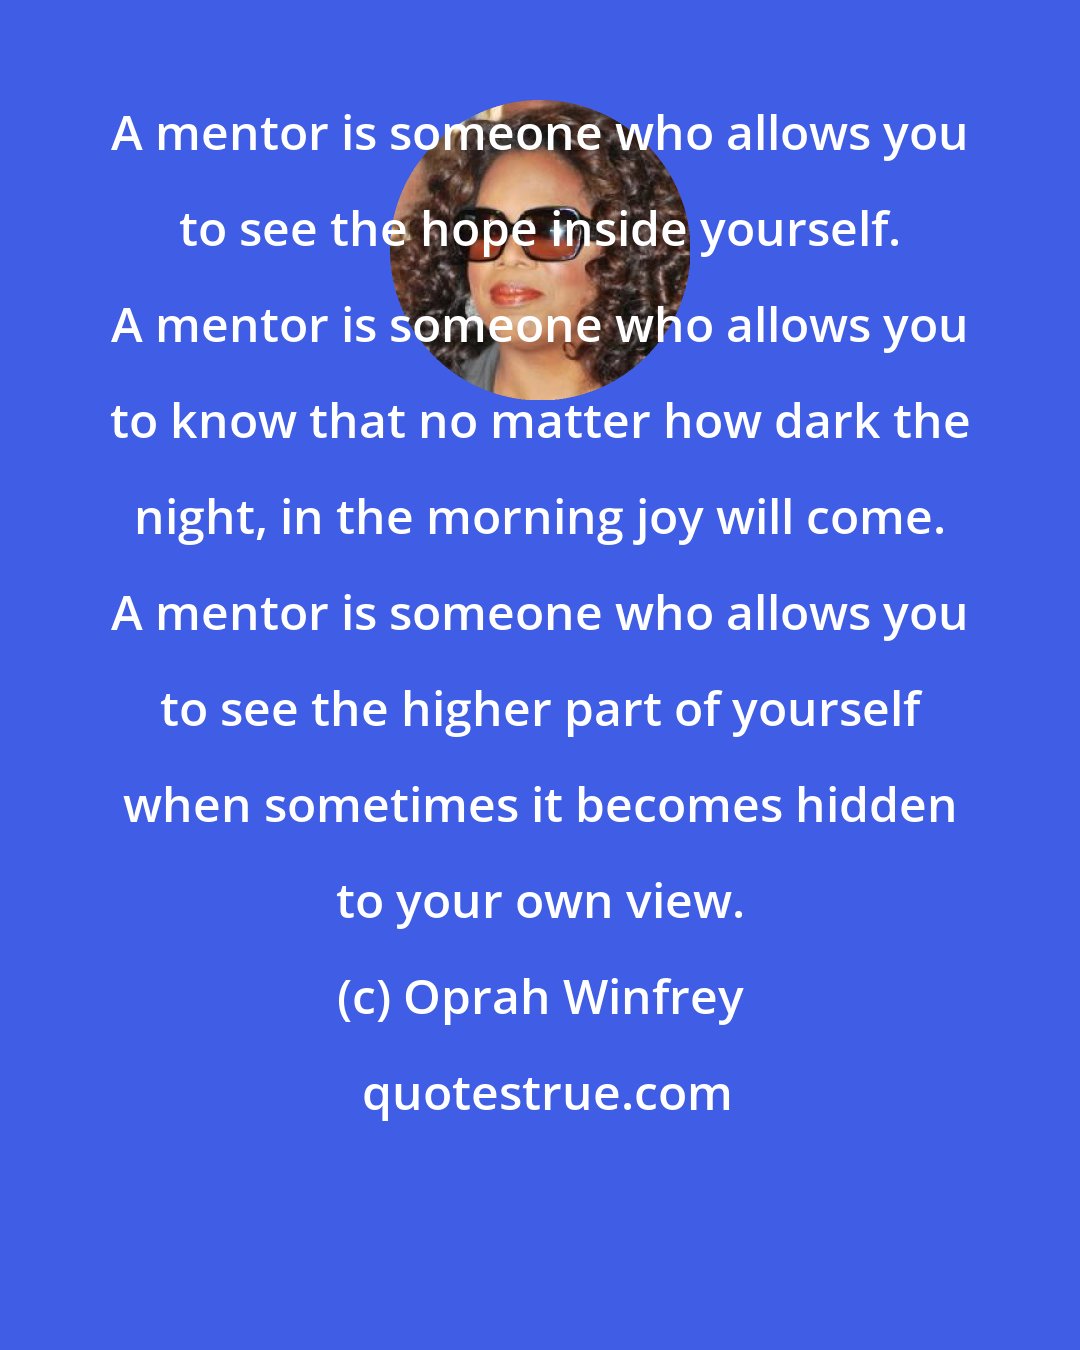 Oprah Winfrey: A mentor is someone who allows you to see the hope inside yourself. A mentor is someone who allows you to know that no matter how dark the night, in the morning joy will come. A mentor is someone who allows you to see the higher part of yourself when sometimes it becomes hidden to your own view.